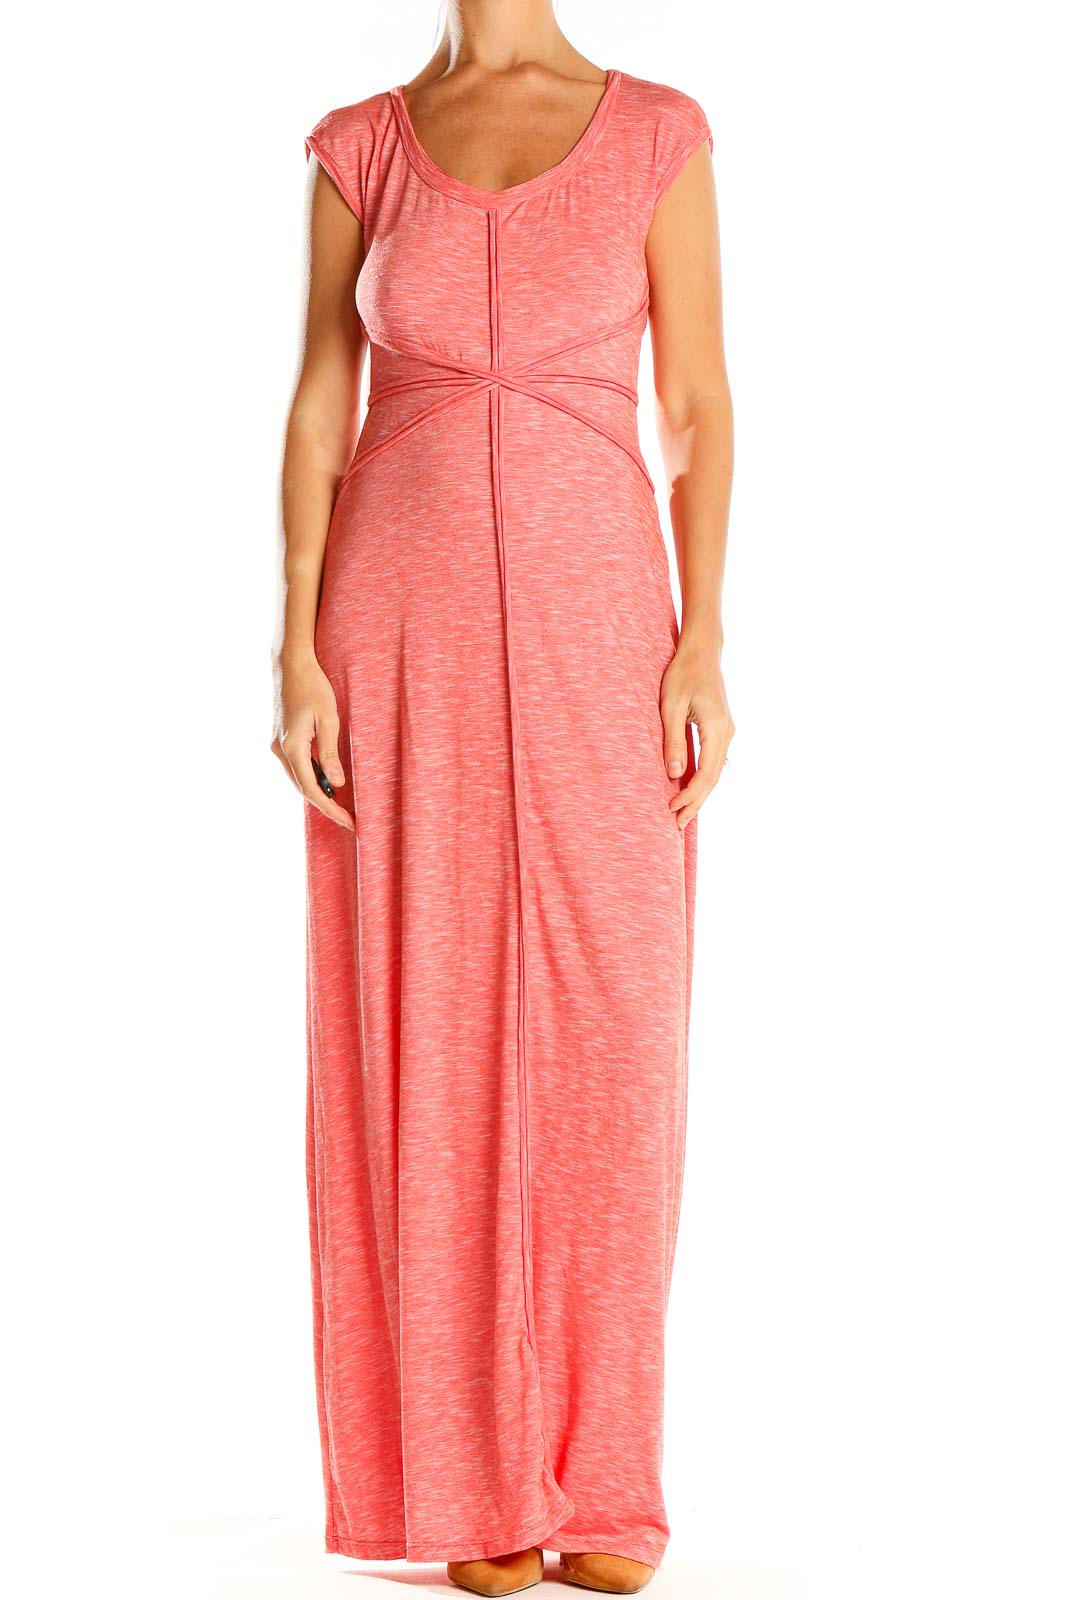 Pink Heather Casual Column Dress Front